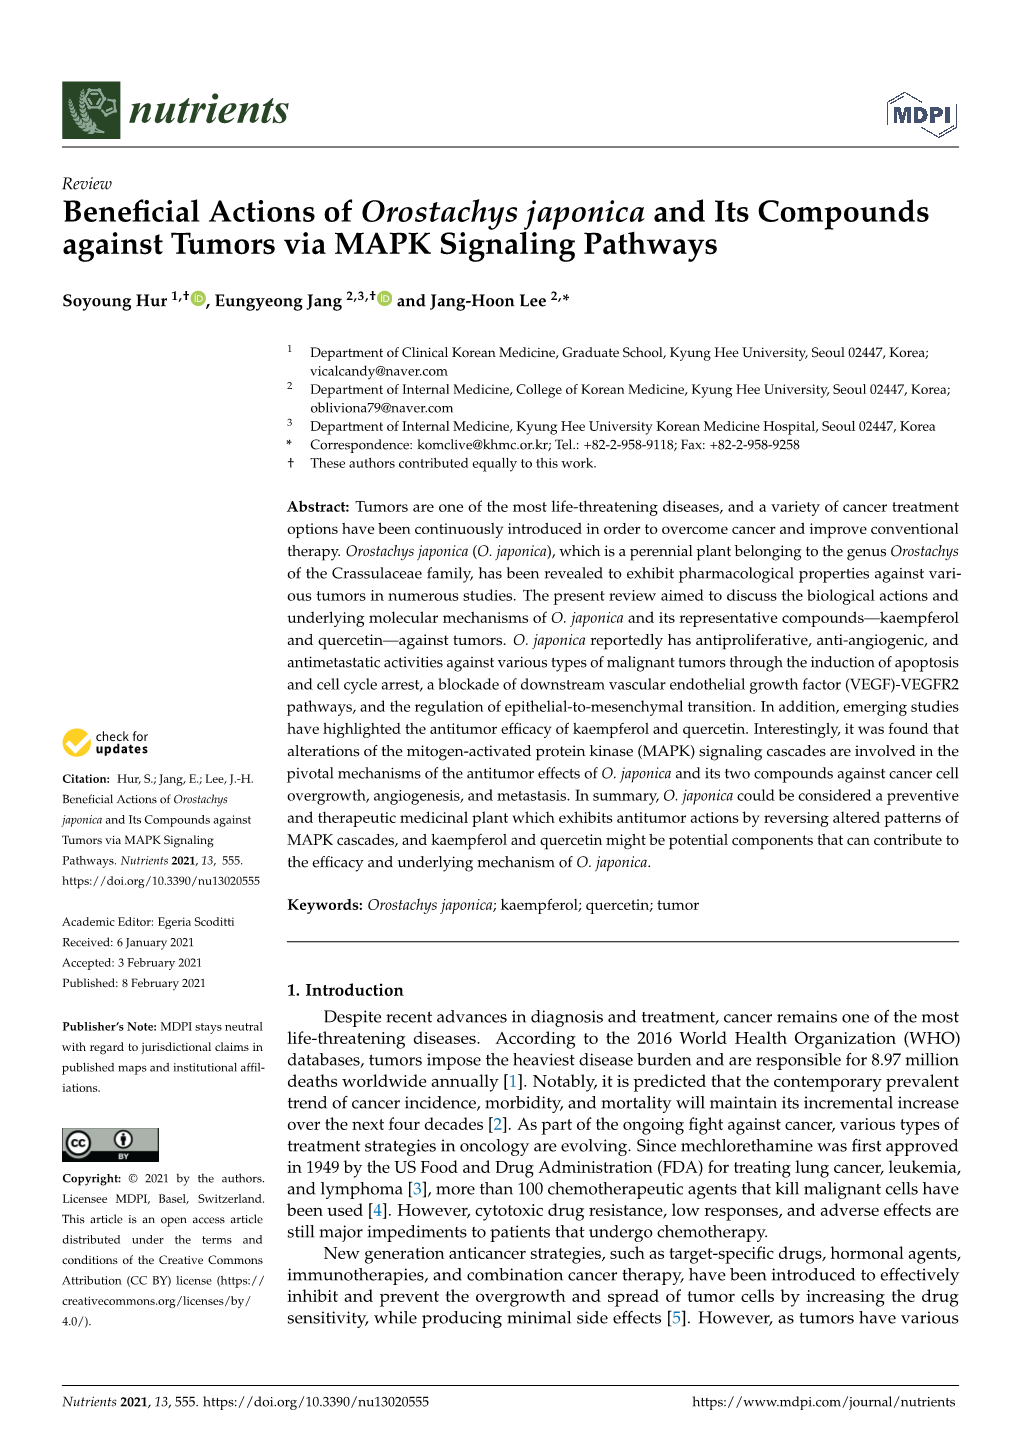 Beneficial Actions of Orostachys Japonica and Its Compounds Against Tumors Via MAPK Signaling Pathways